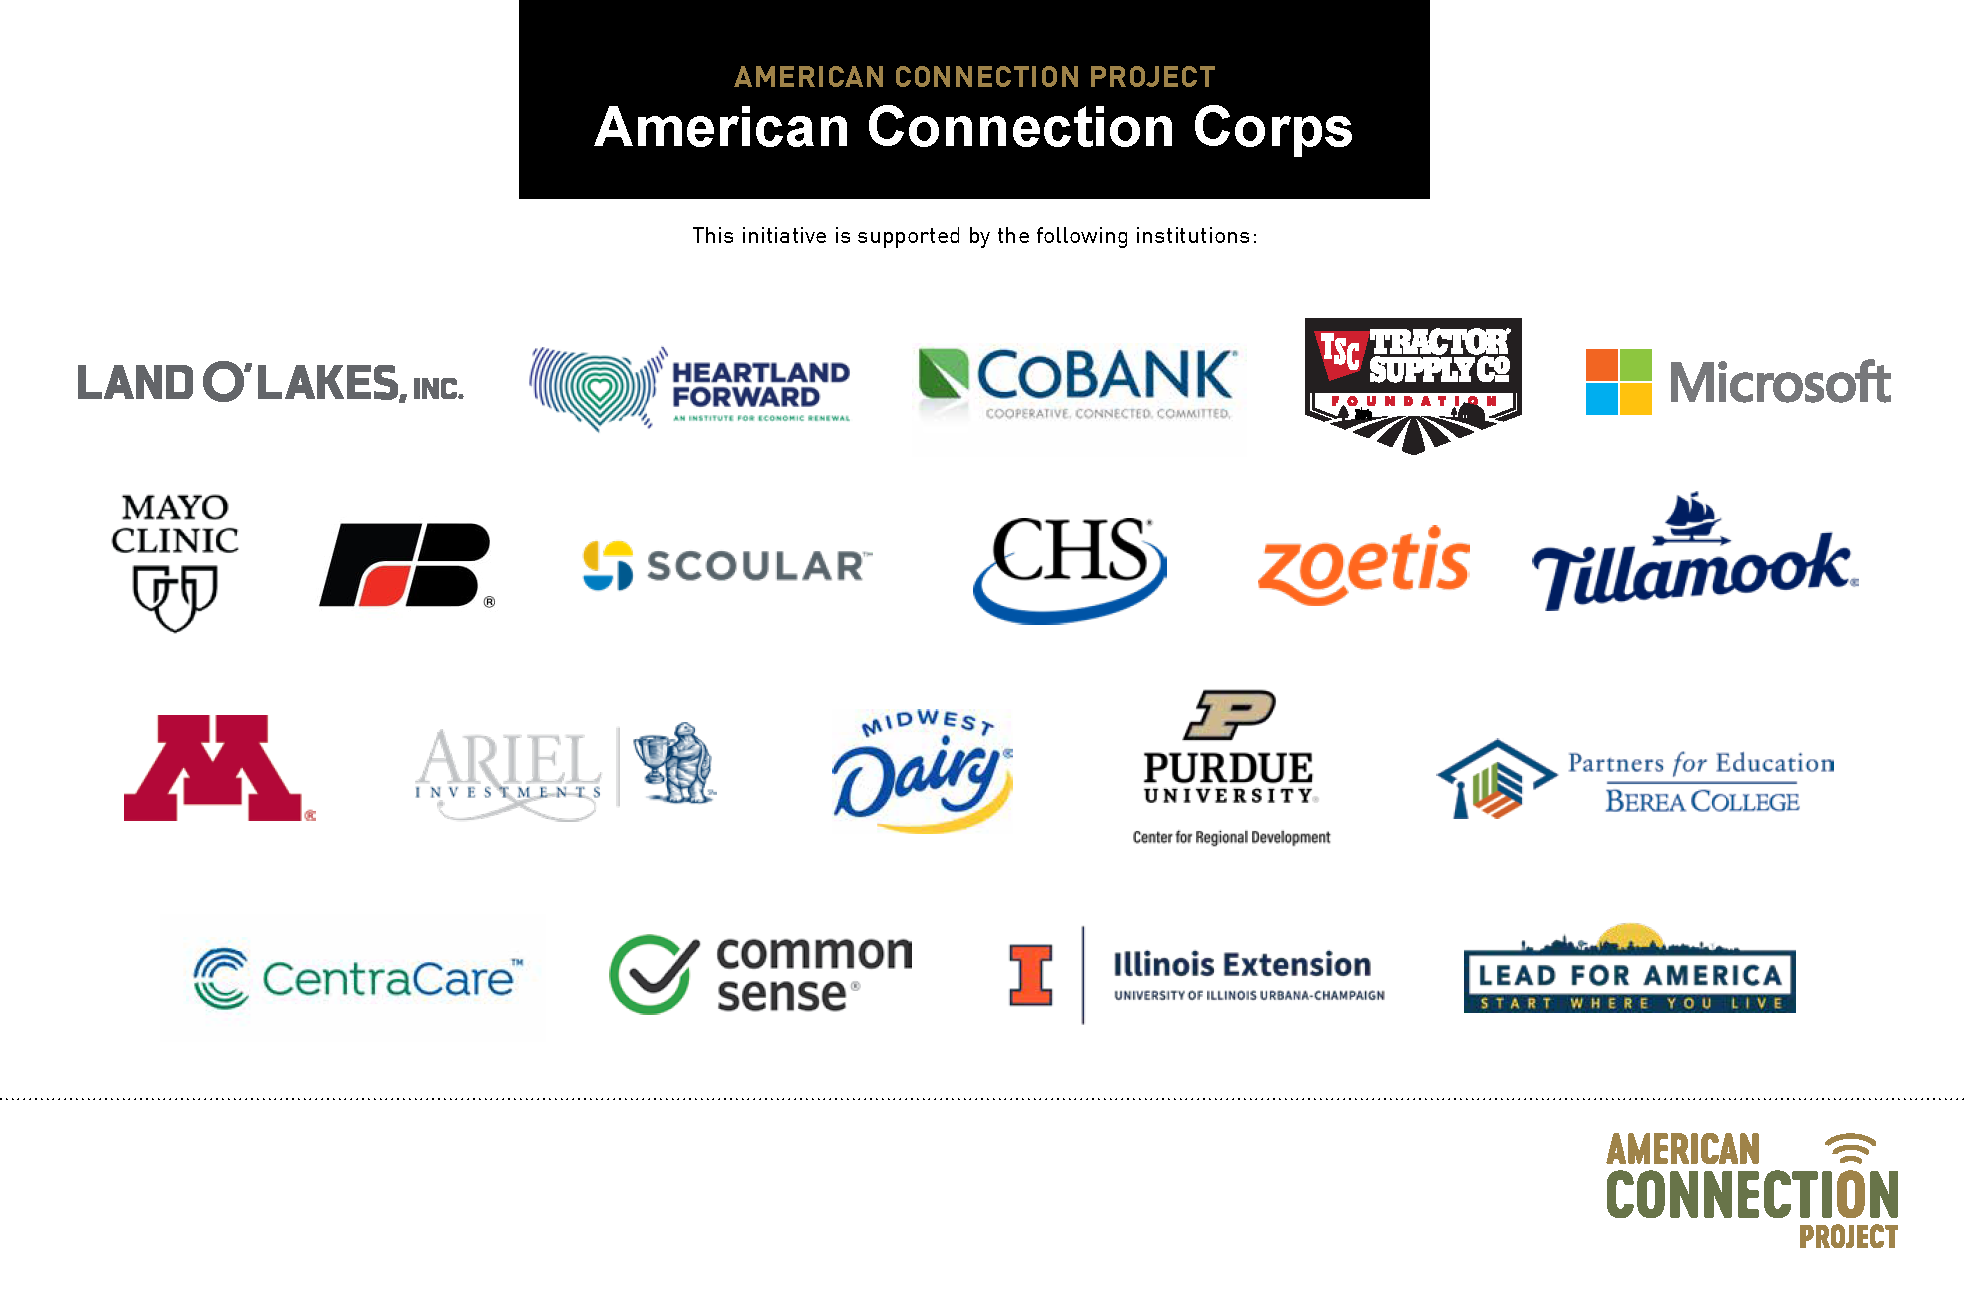 What partner organizations are saying about the American Connection Corps